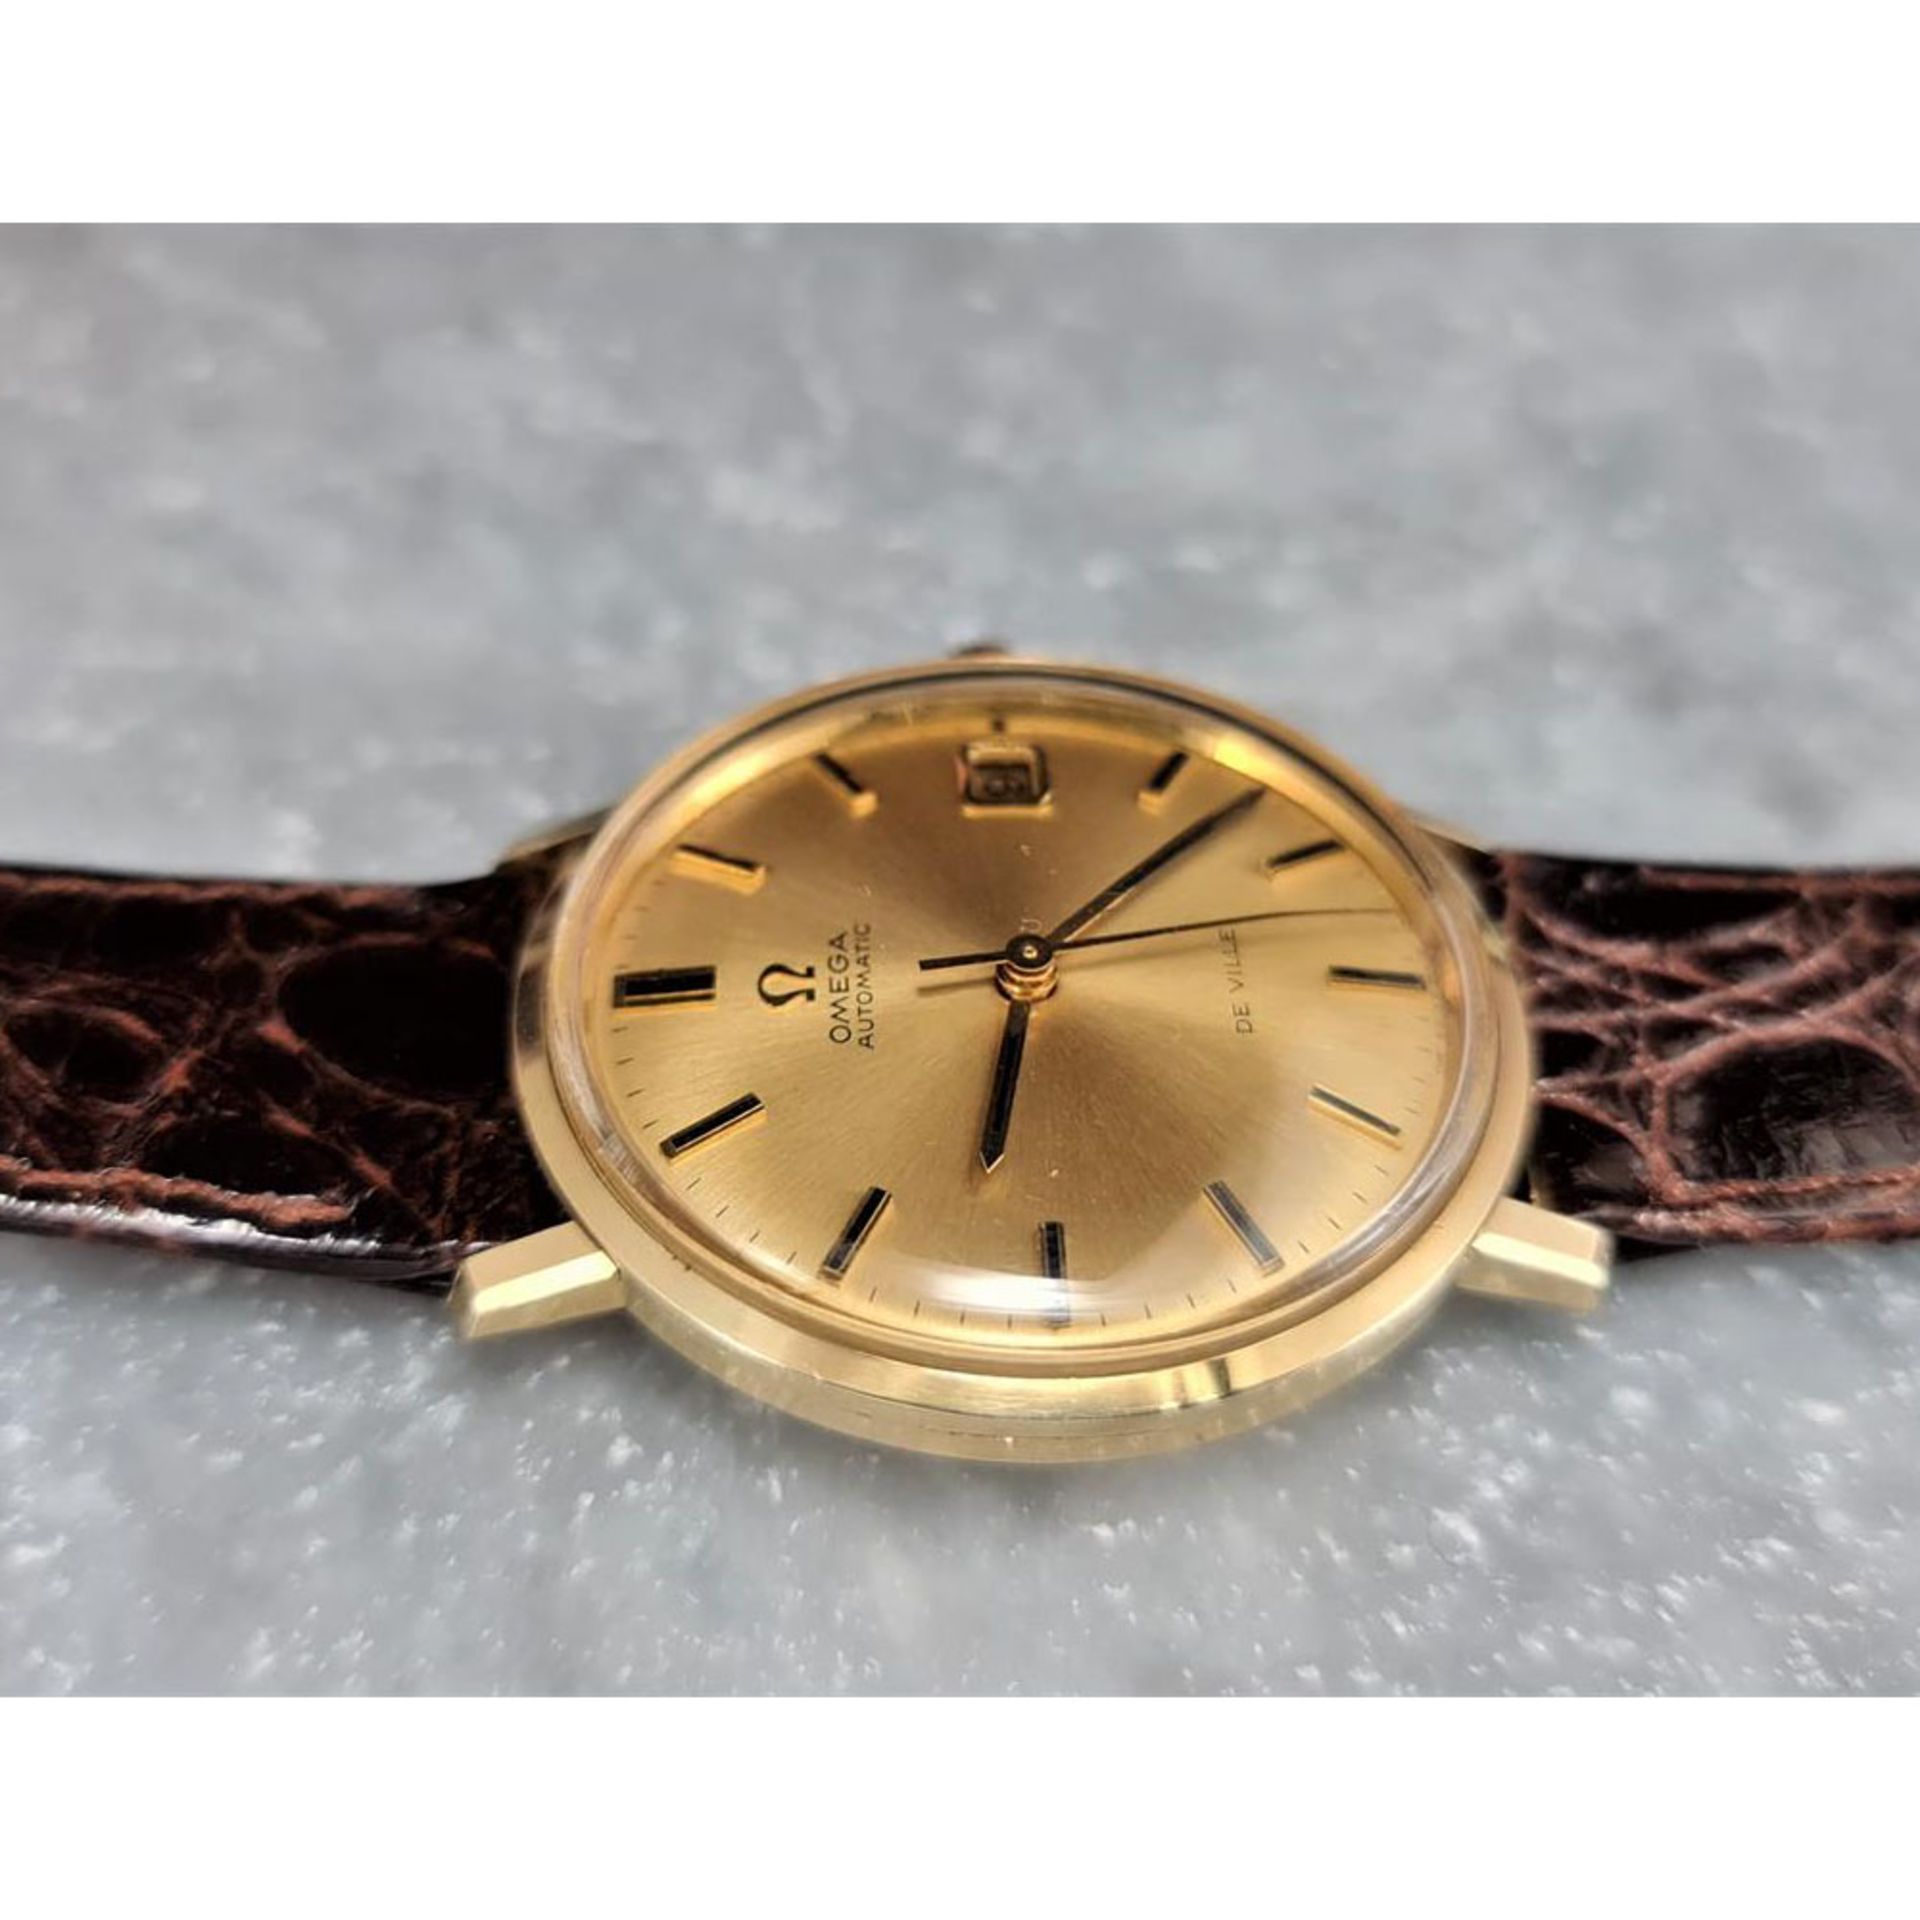 1970 Omega Seamaster De Ville Automatic Date - 14K Gold Watch - Image 5 of 8